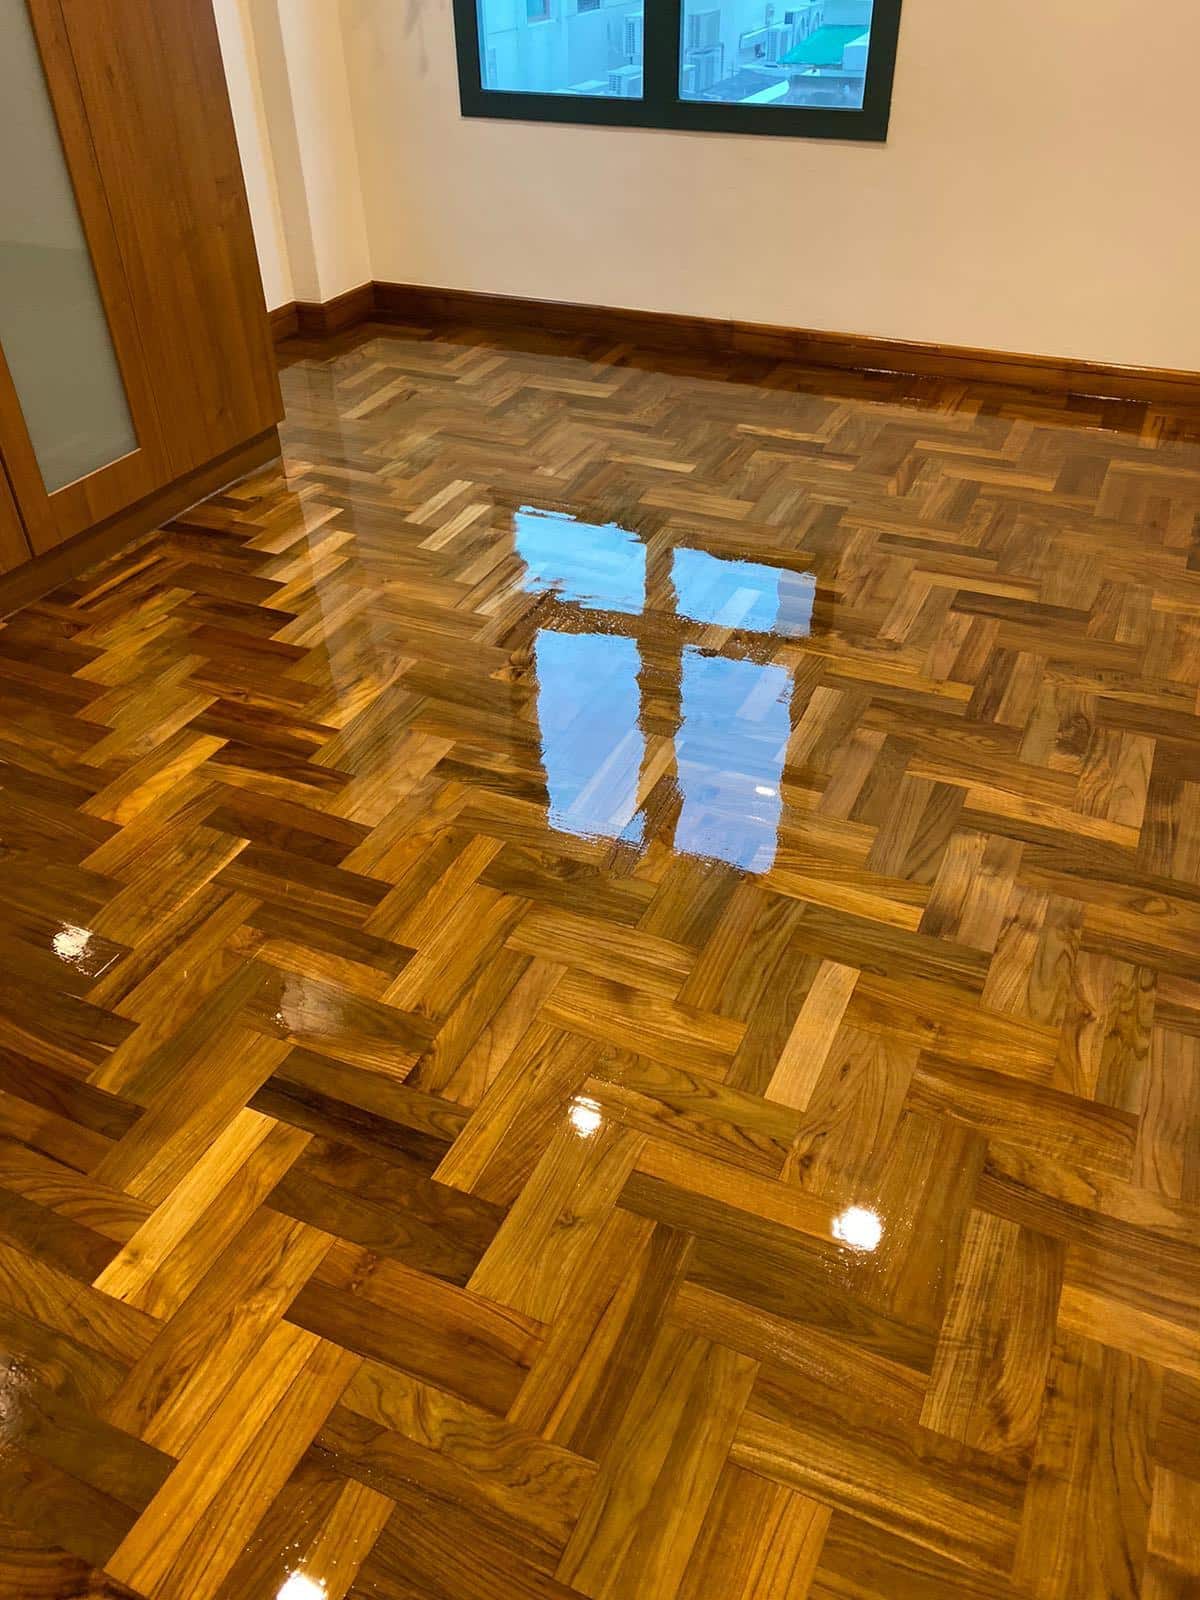 7 Simple Steps to Polishing Timber Floors Like a Pro In Kuantan